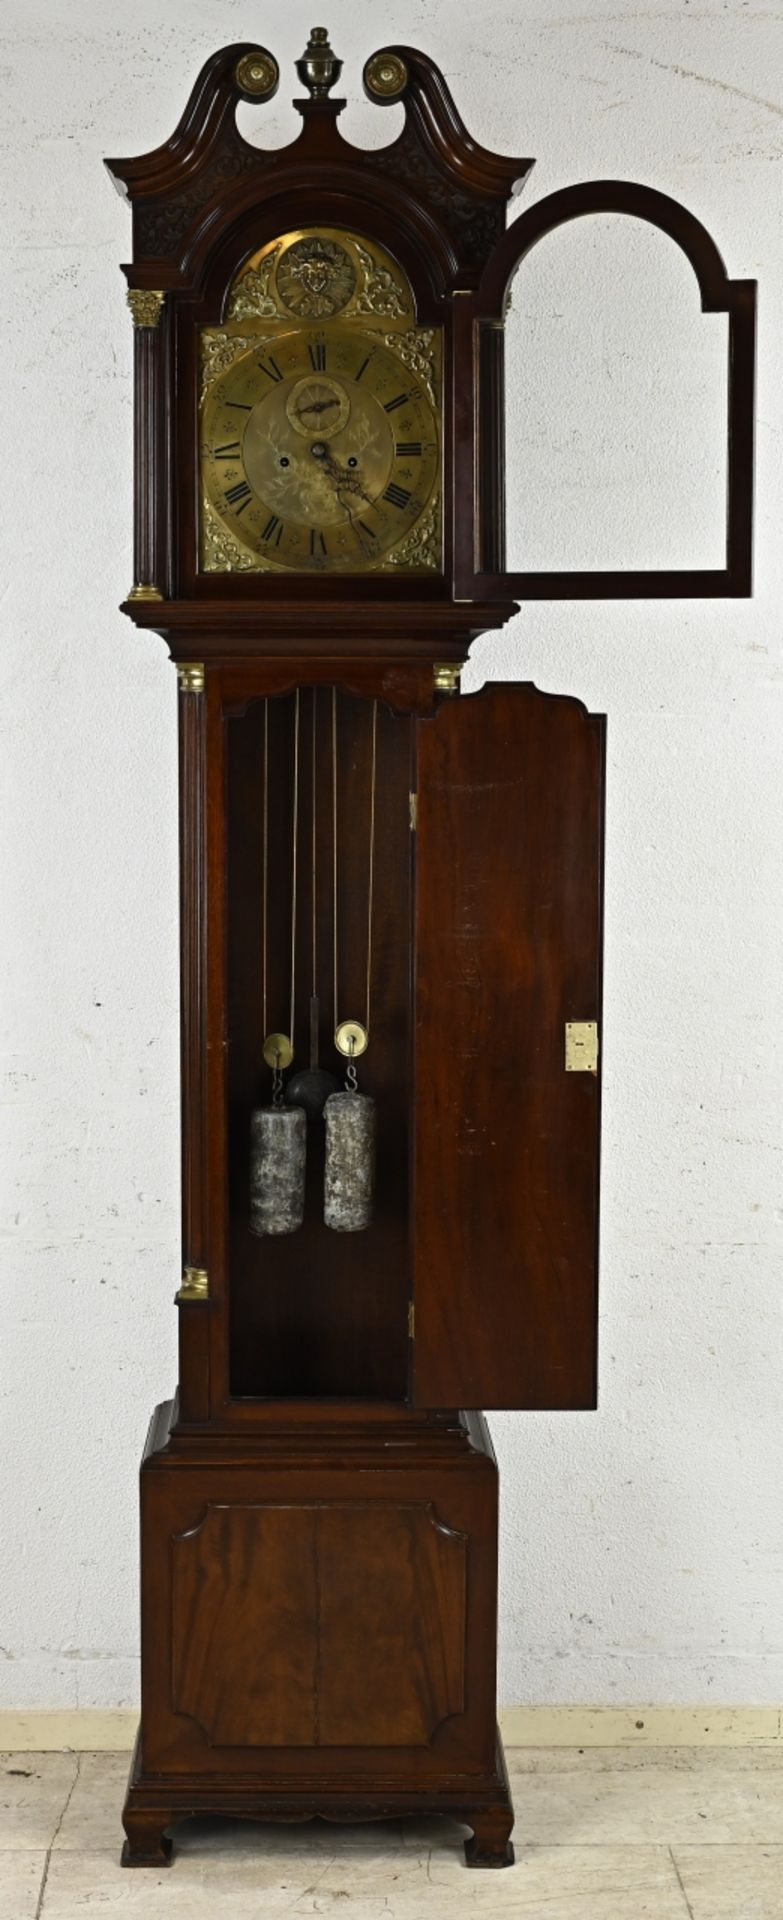 Grandfather clock, 1780 - Image 2 of 2